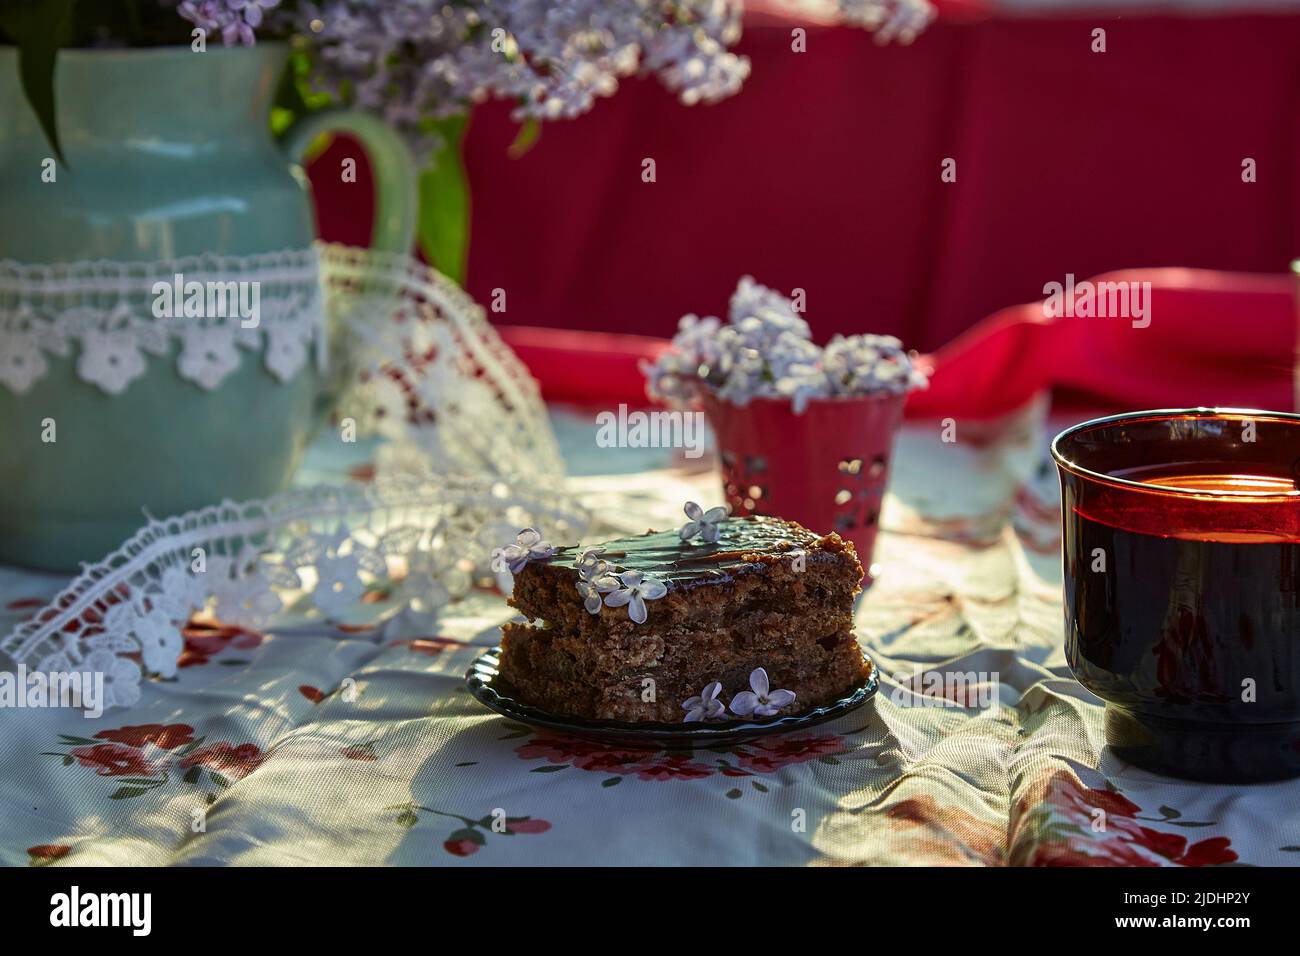 Moody homemade chocolate cake. Dessert and cup of coffee among flowers. Atmospheric breakfast.  Stock Photo